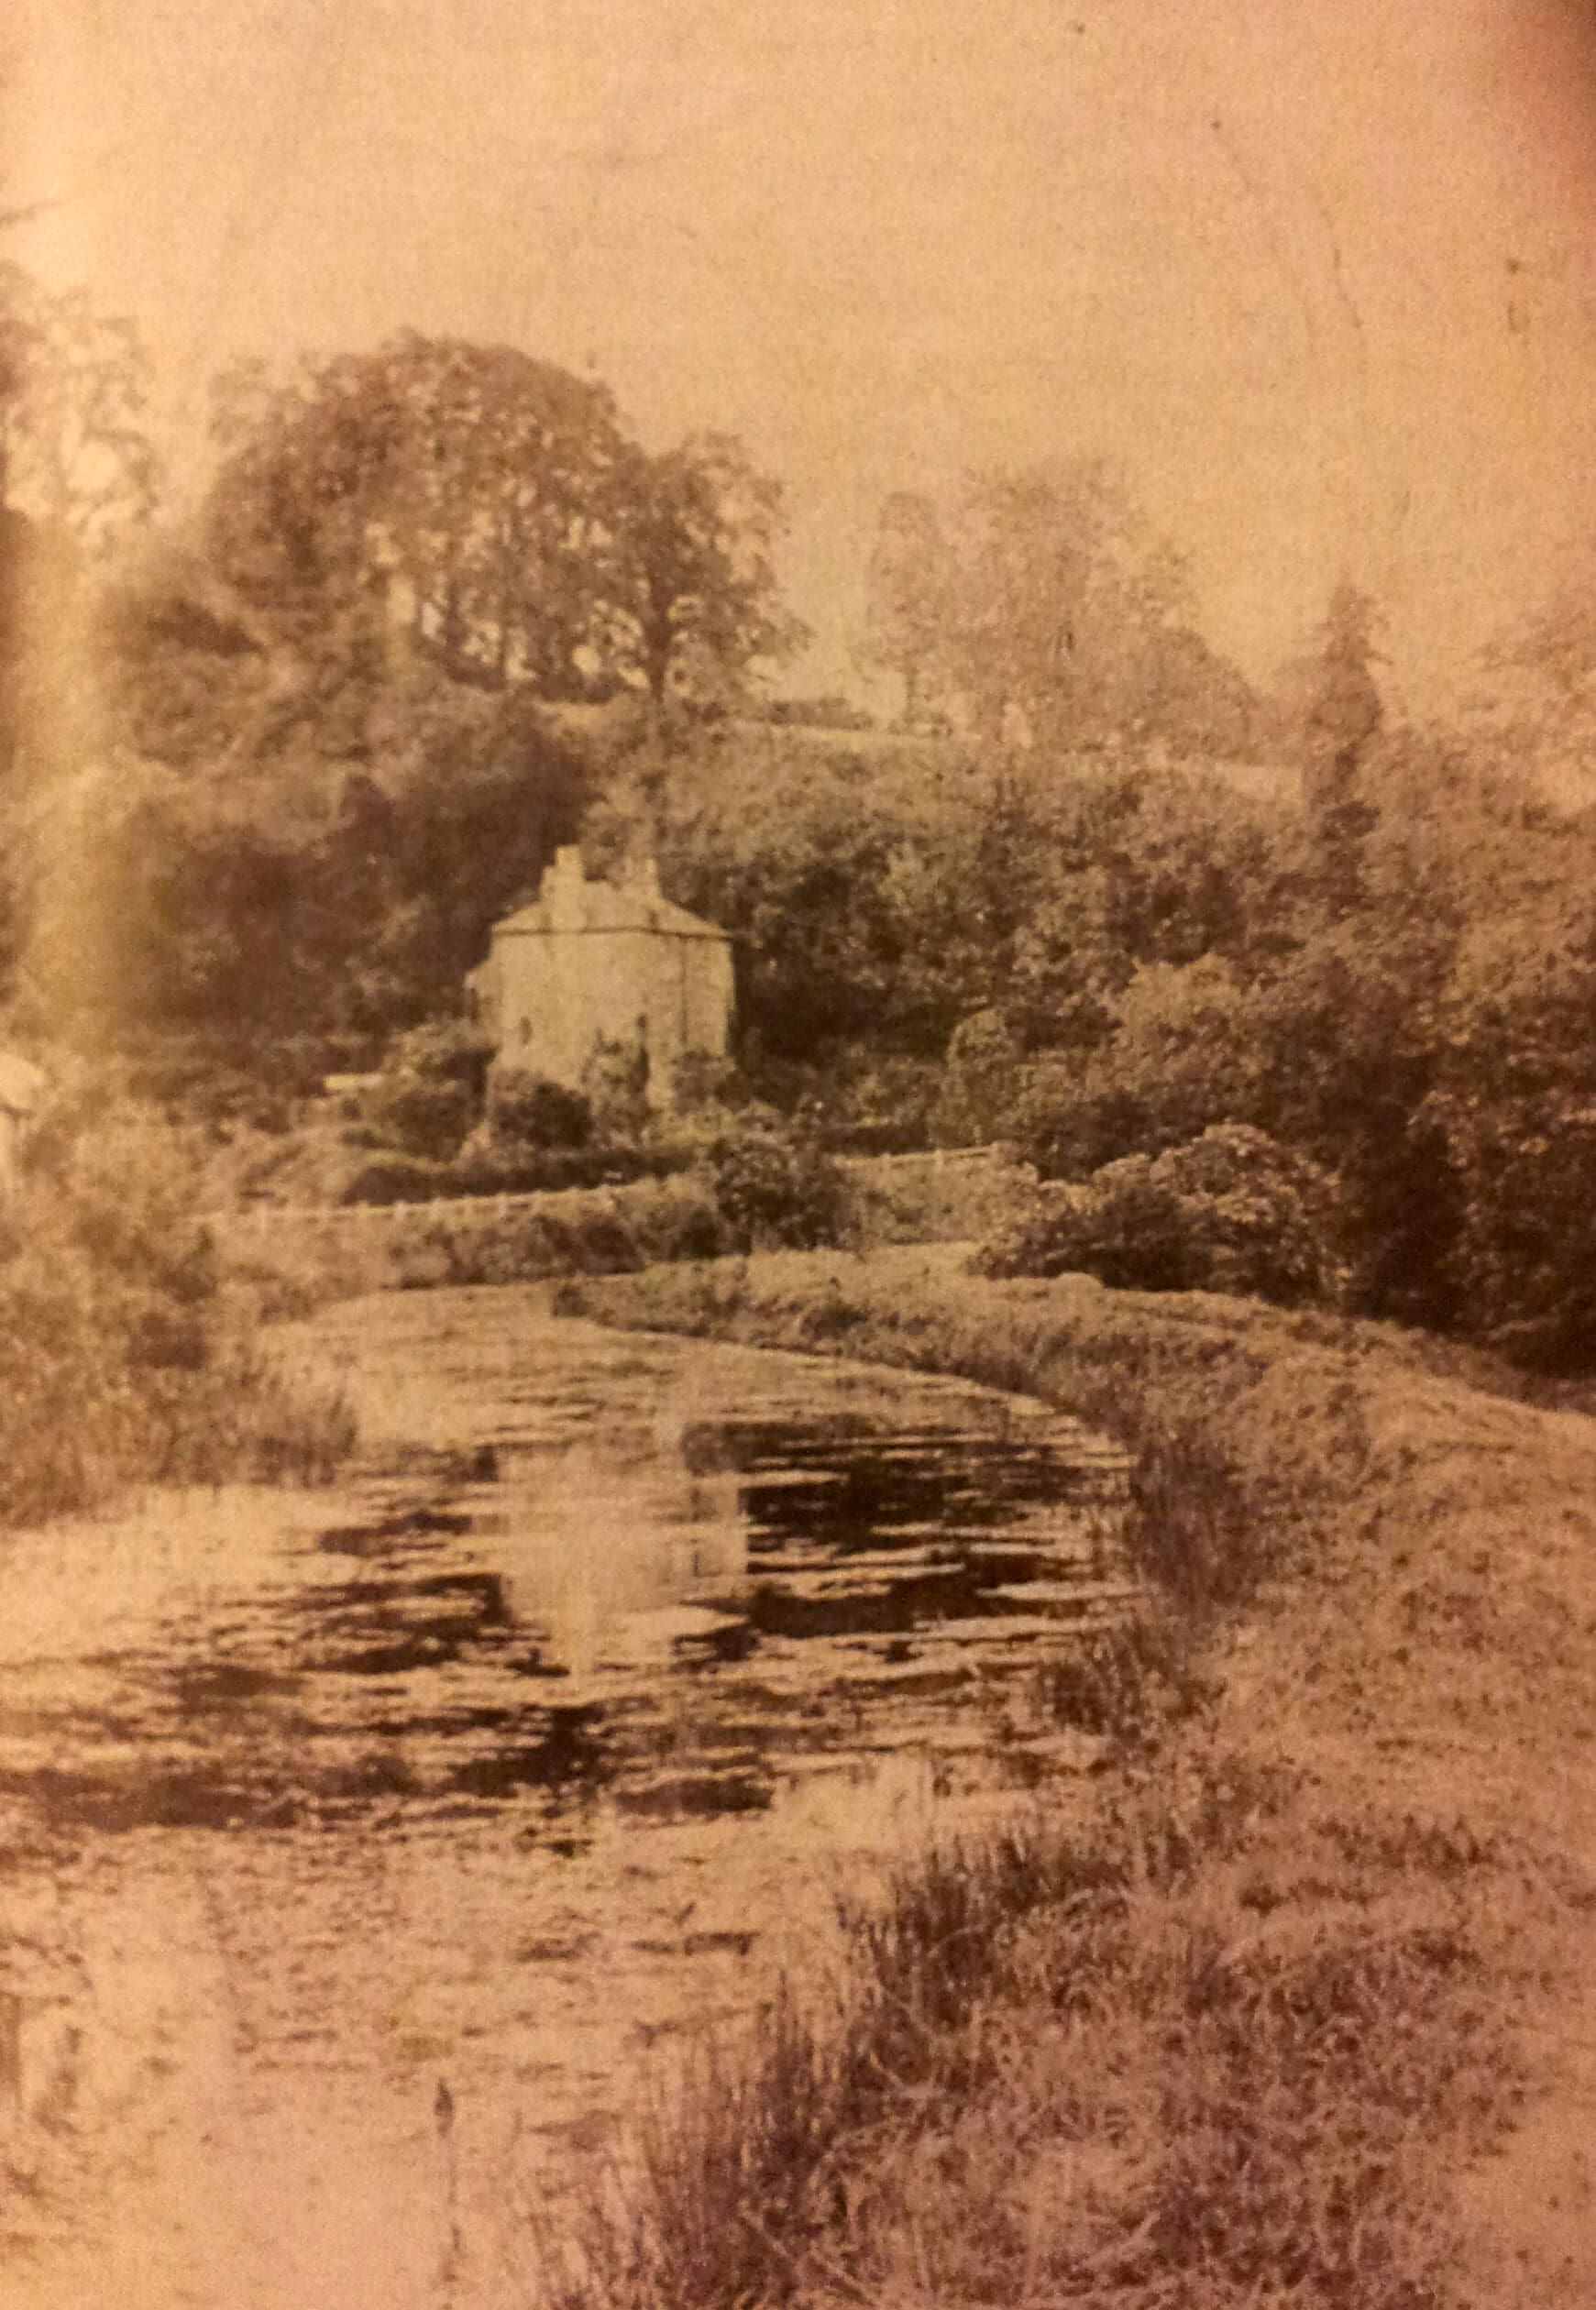 somerset-coal-canal-and-tucking-mill-house-early-1900s